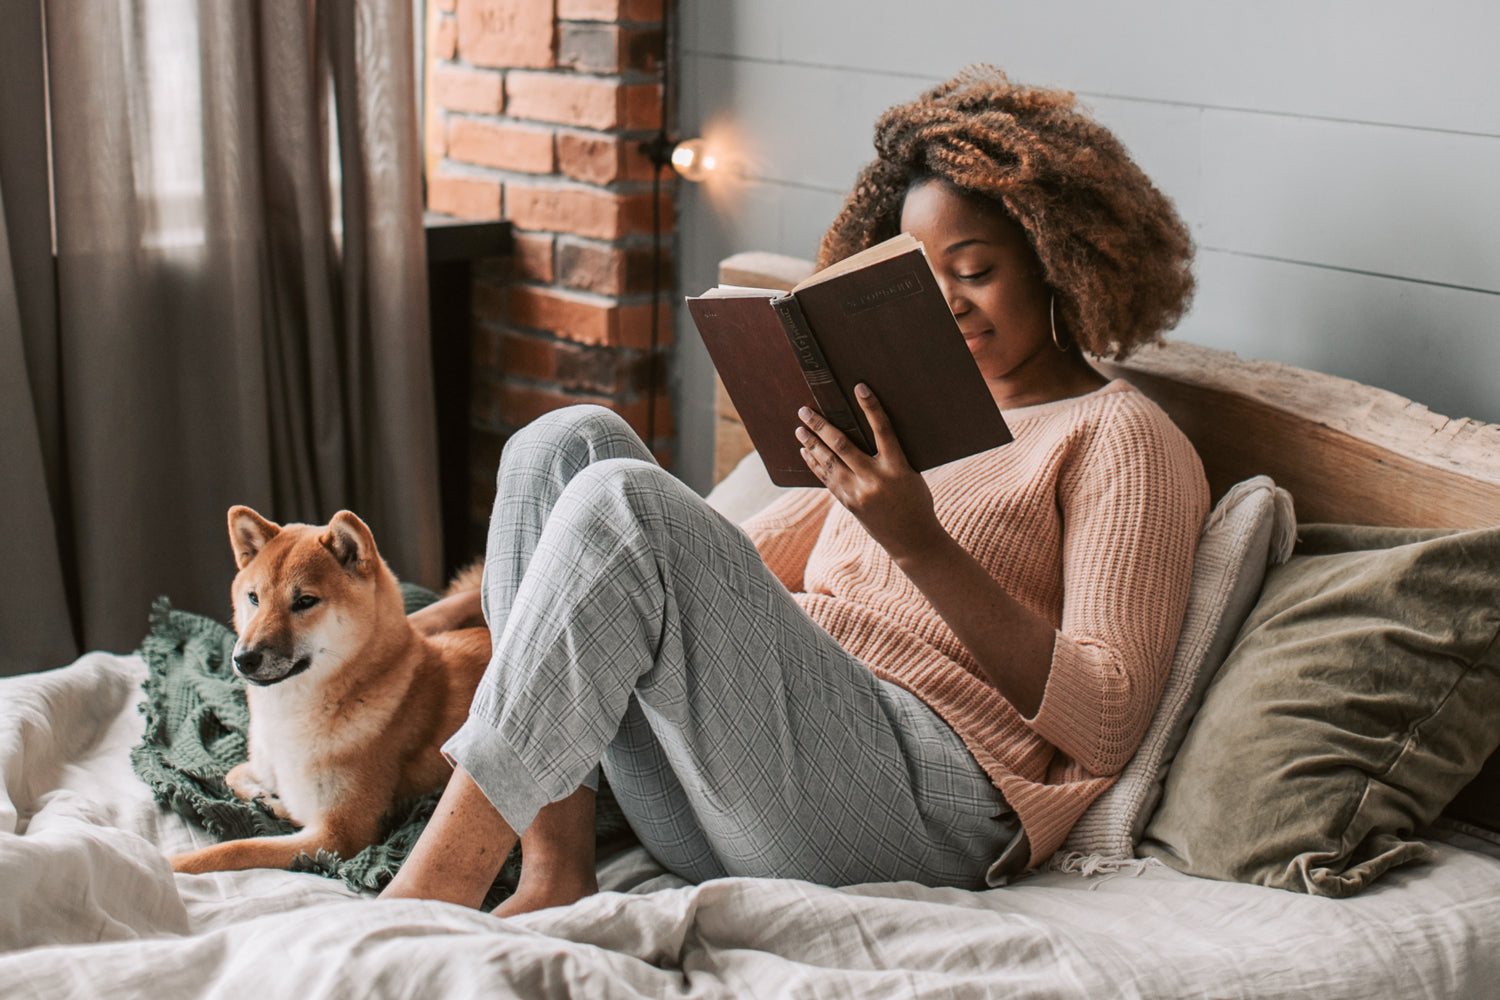 A woman reads a book in bed with a dog